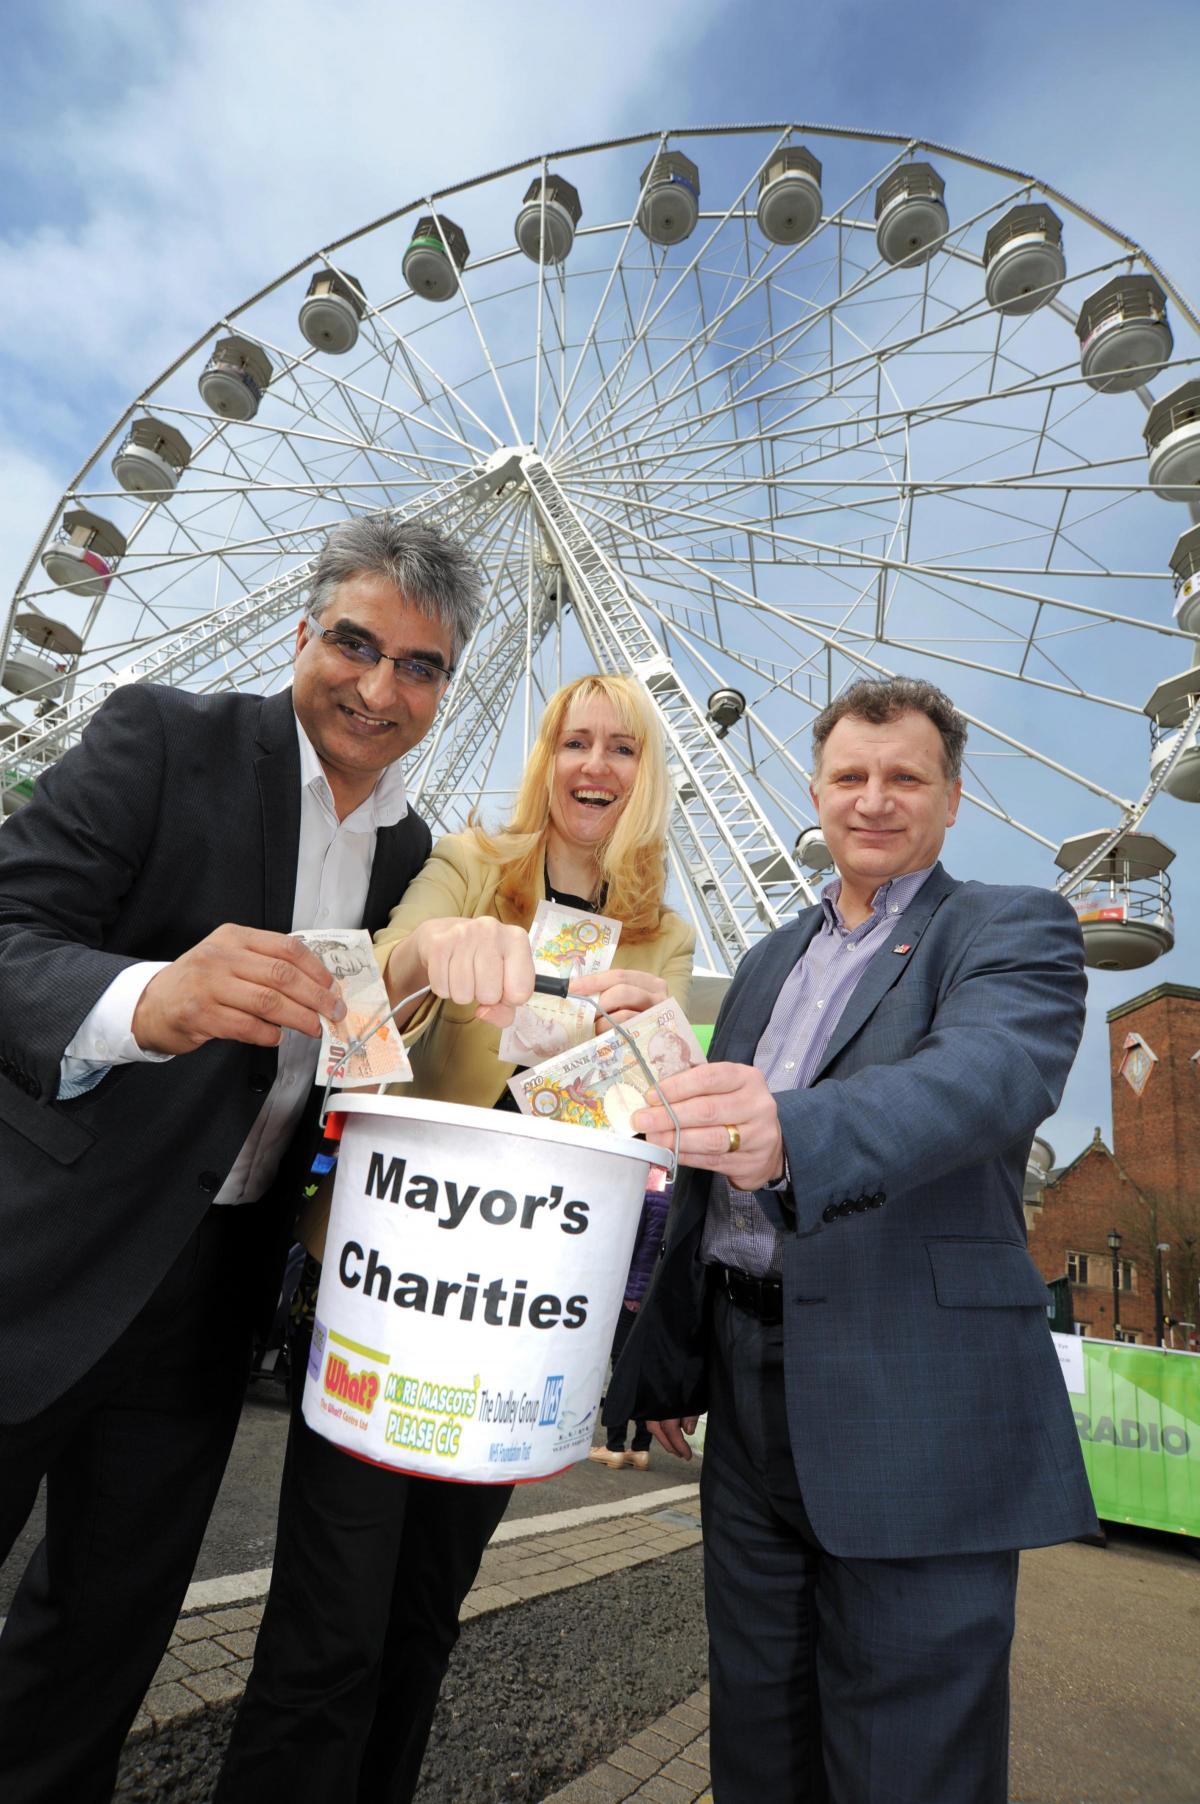 Cllrs Khurshid Ahmed, Judy Foster and Pete Lowe collect money for the Mayor's charities